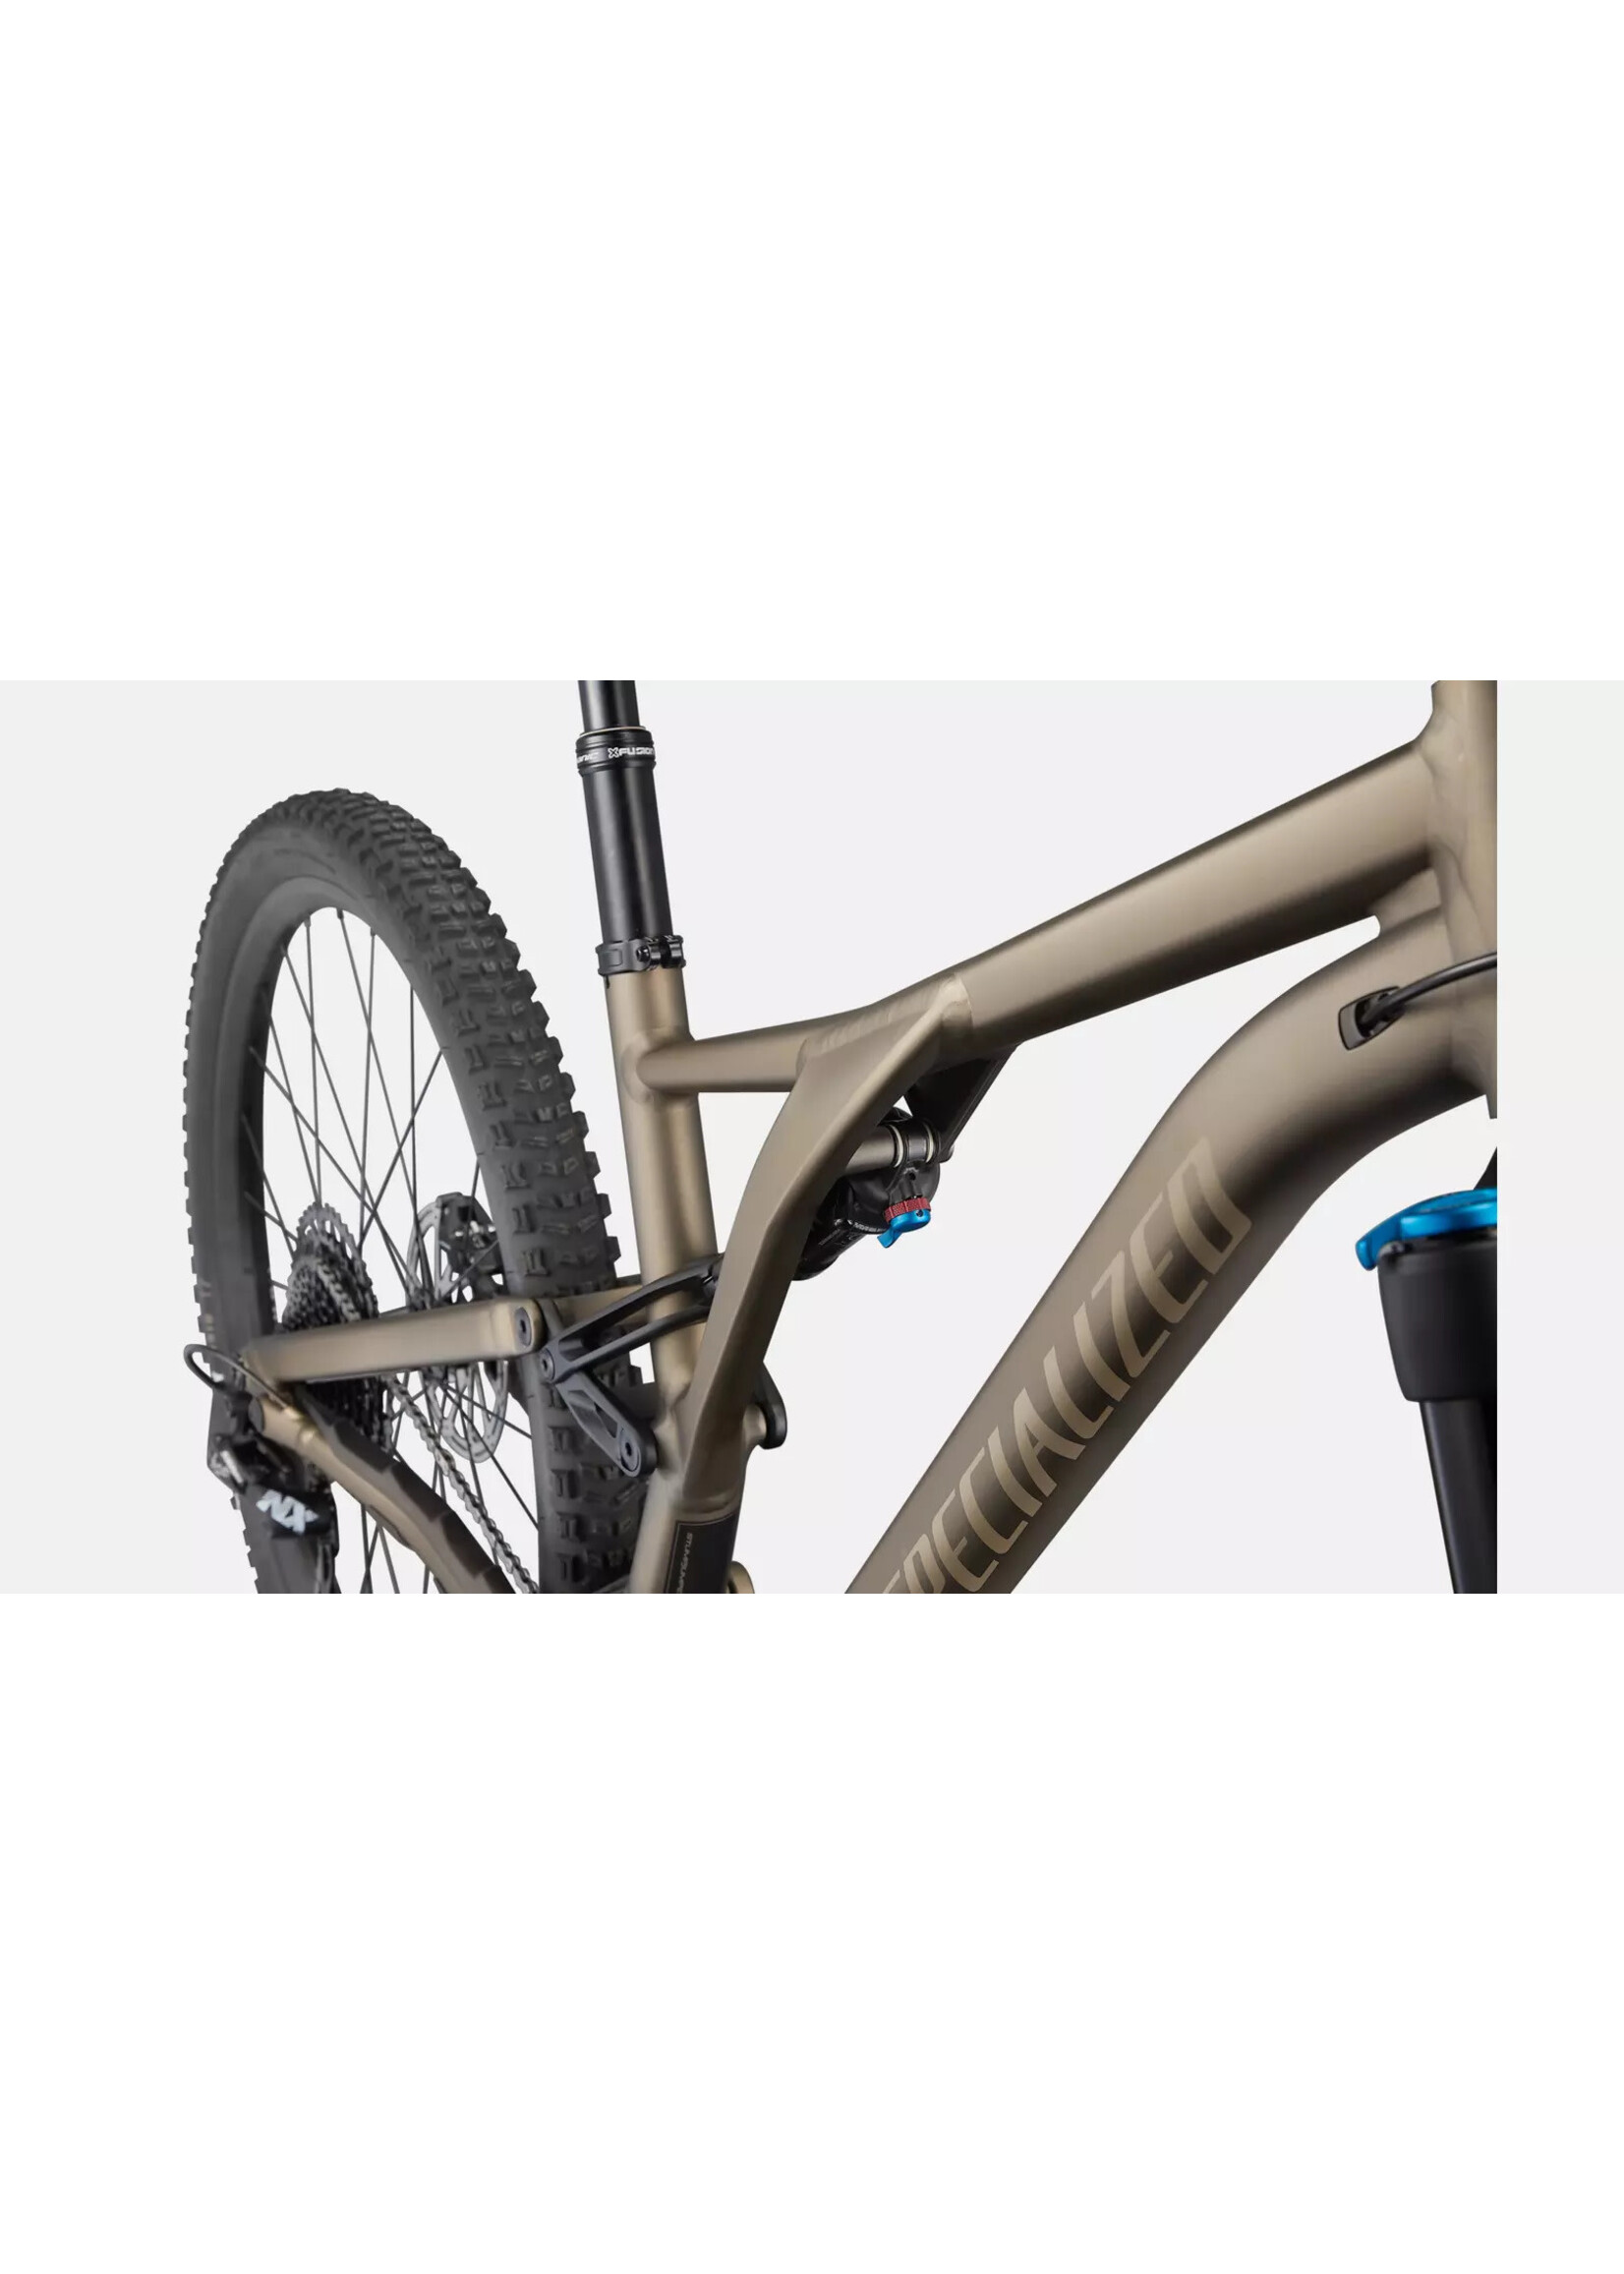 Specialized Specialized Stumpjumper Comp Alloy